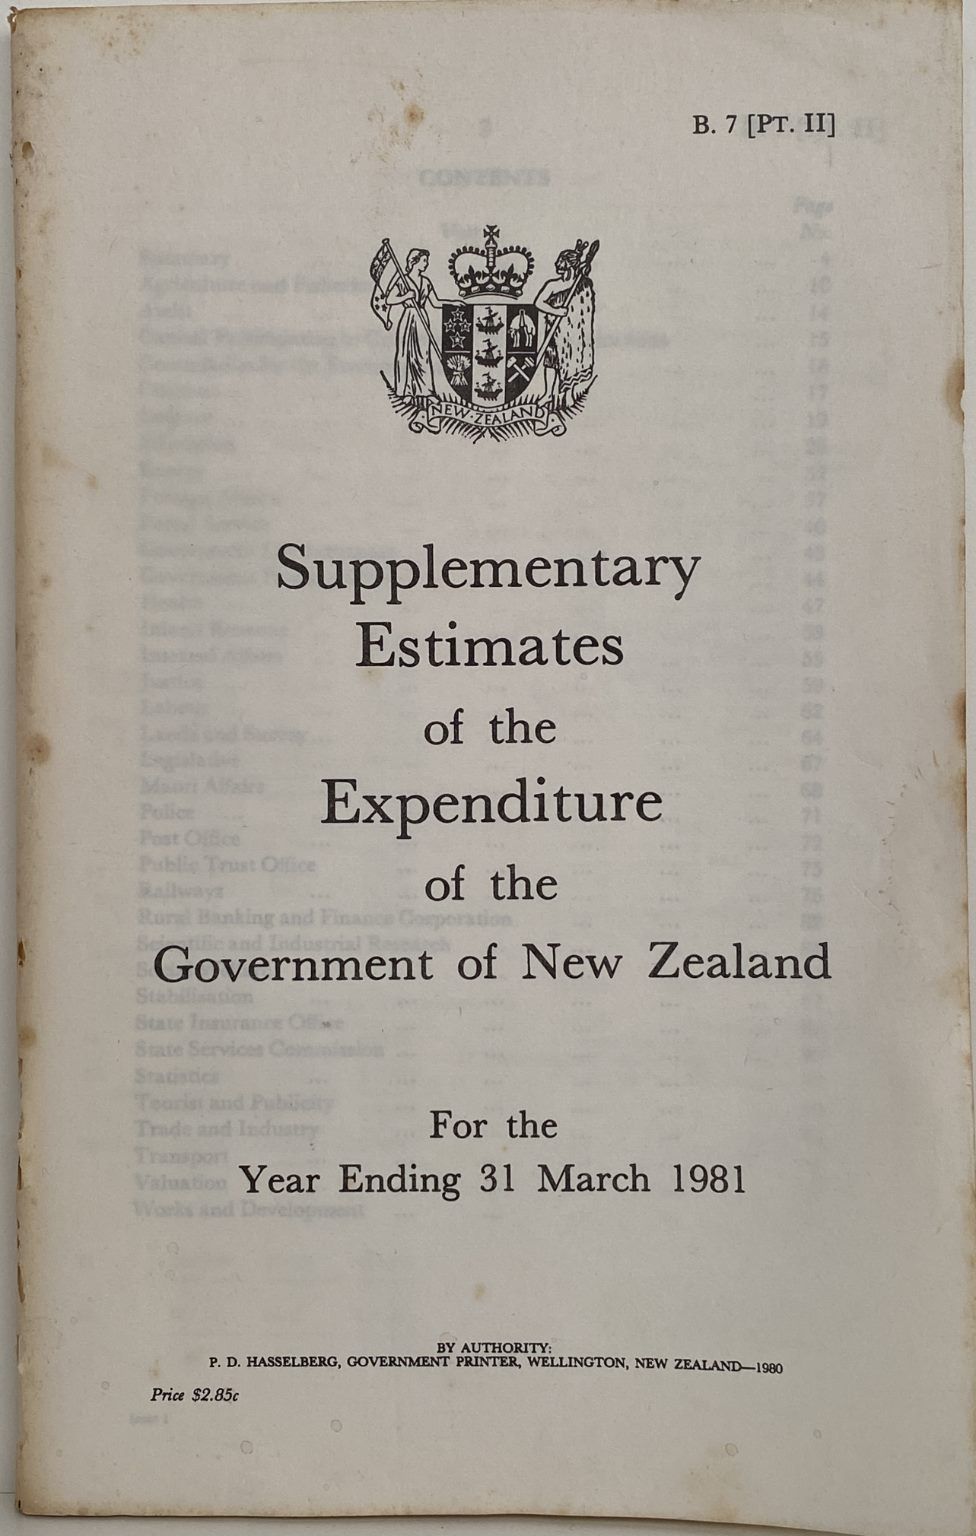 SUPPLEMENTARY ESTIMATES of the EXPENDITURE of the GOVERMENT of NZ 1981